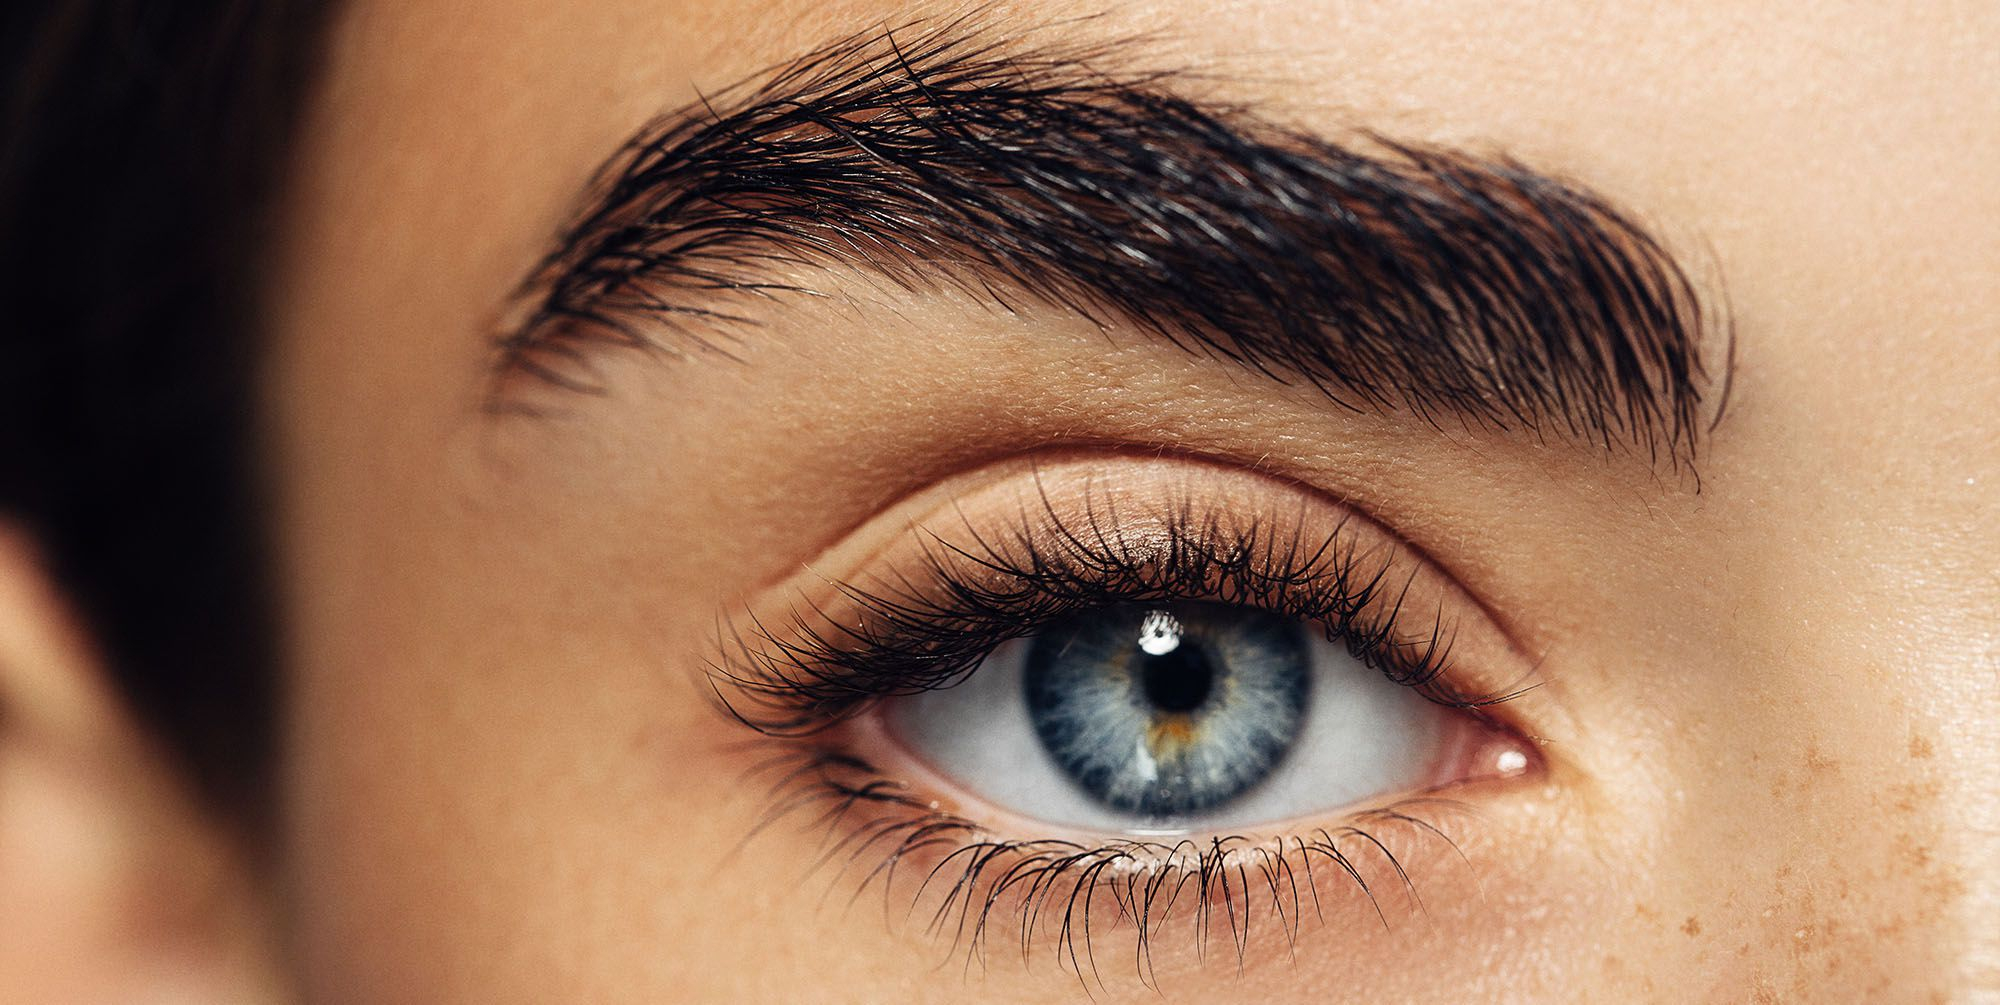 Best Makeup For Hazel Eyes How To Look Less Tired How To Make Eyes Look Awake